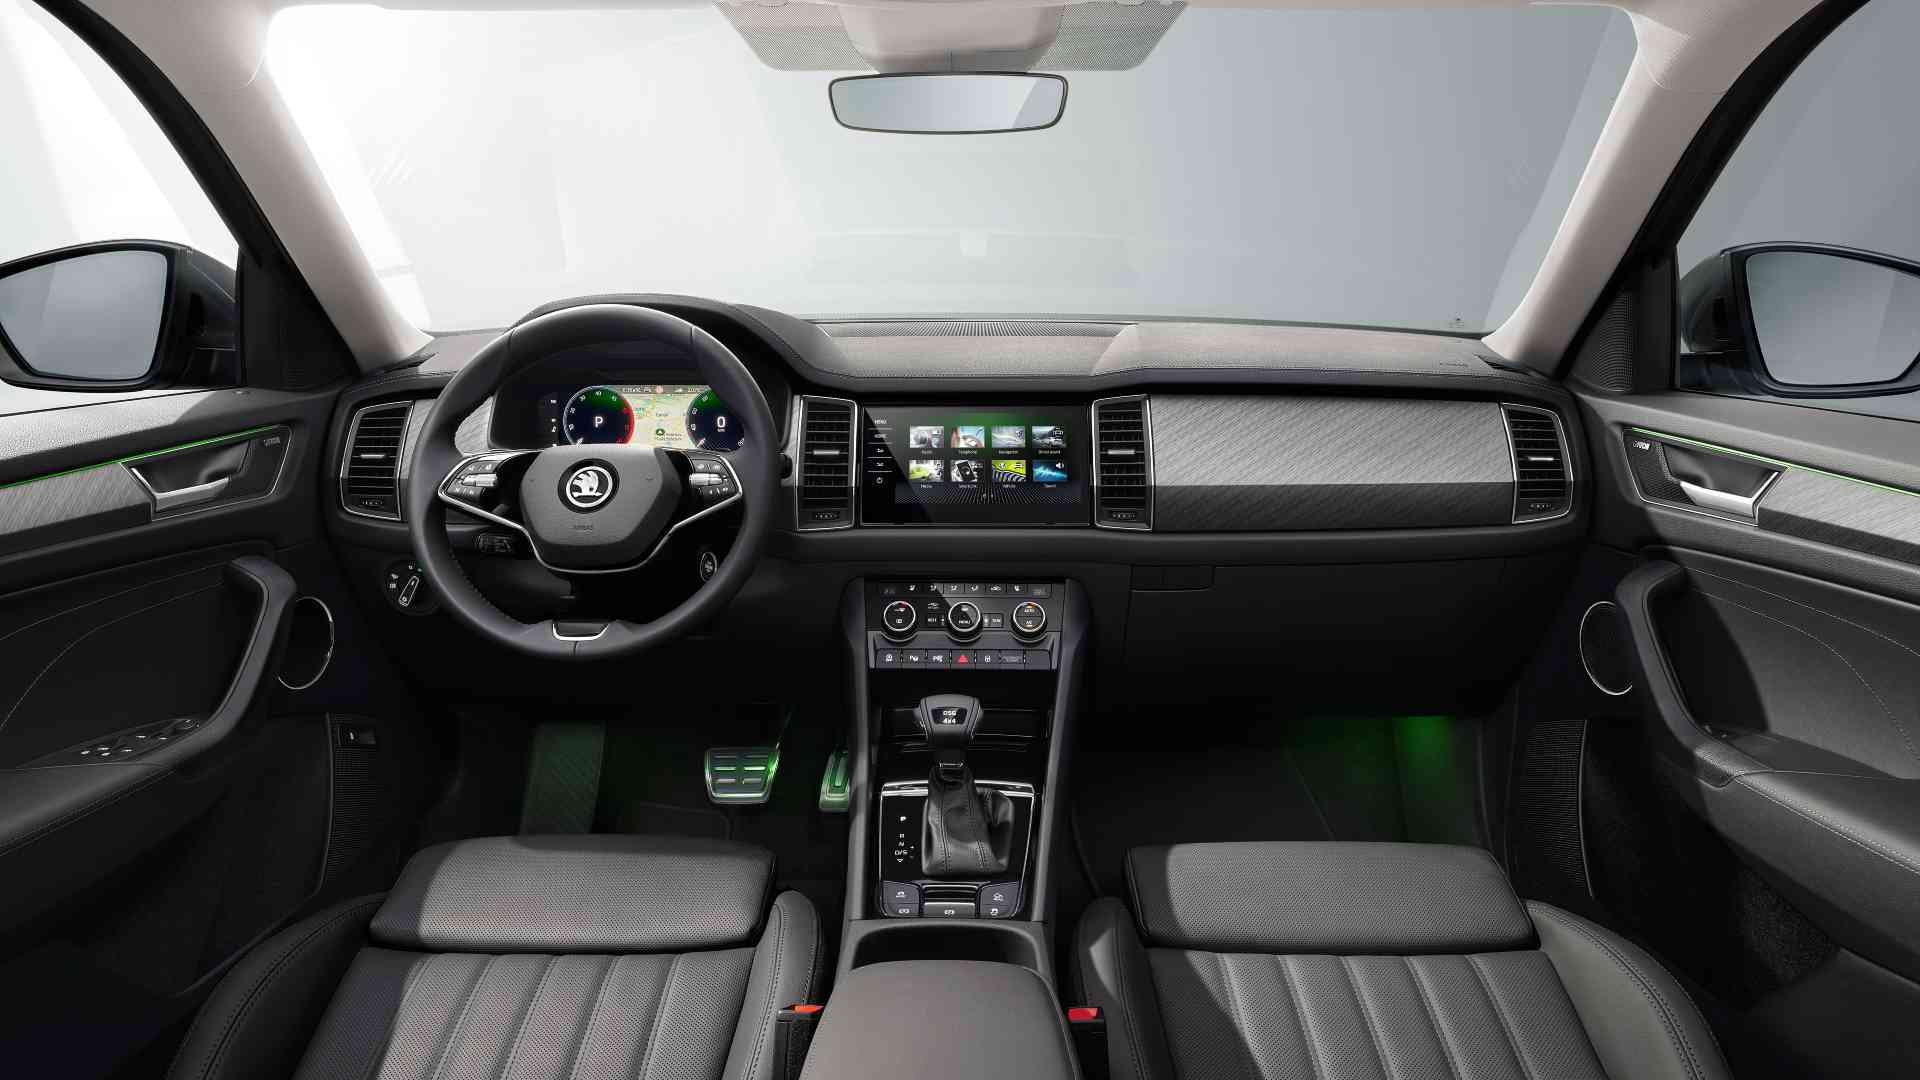 Front seats of the 2021 Skoda Kodiaq L&K feature ventilation and massage functions. Image: Skoda